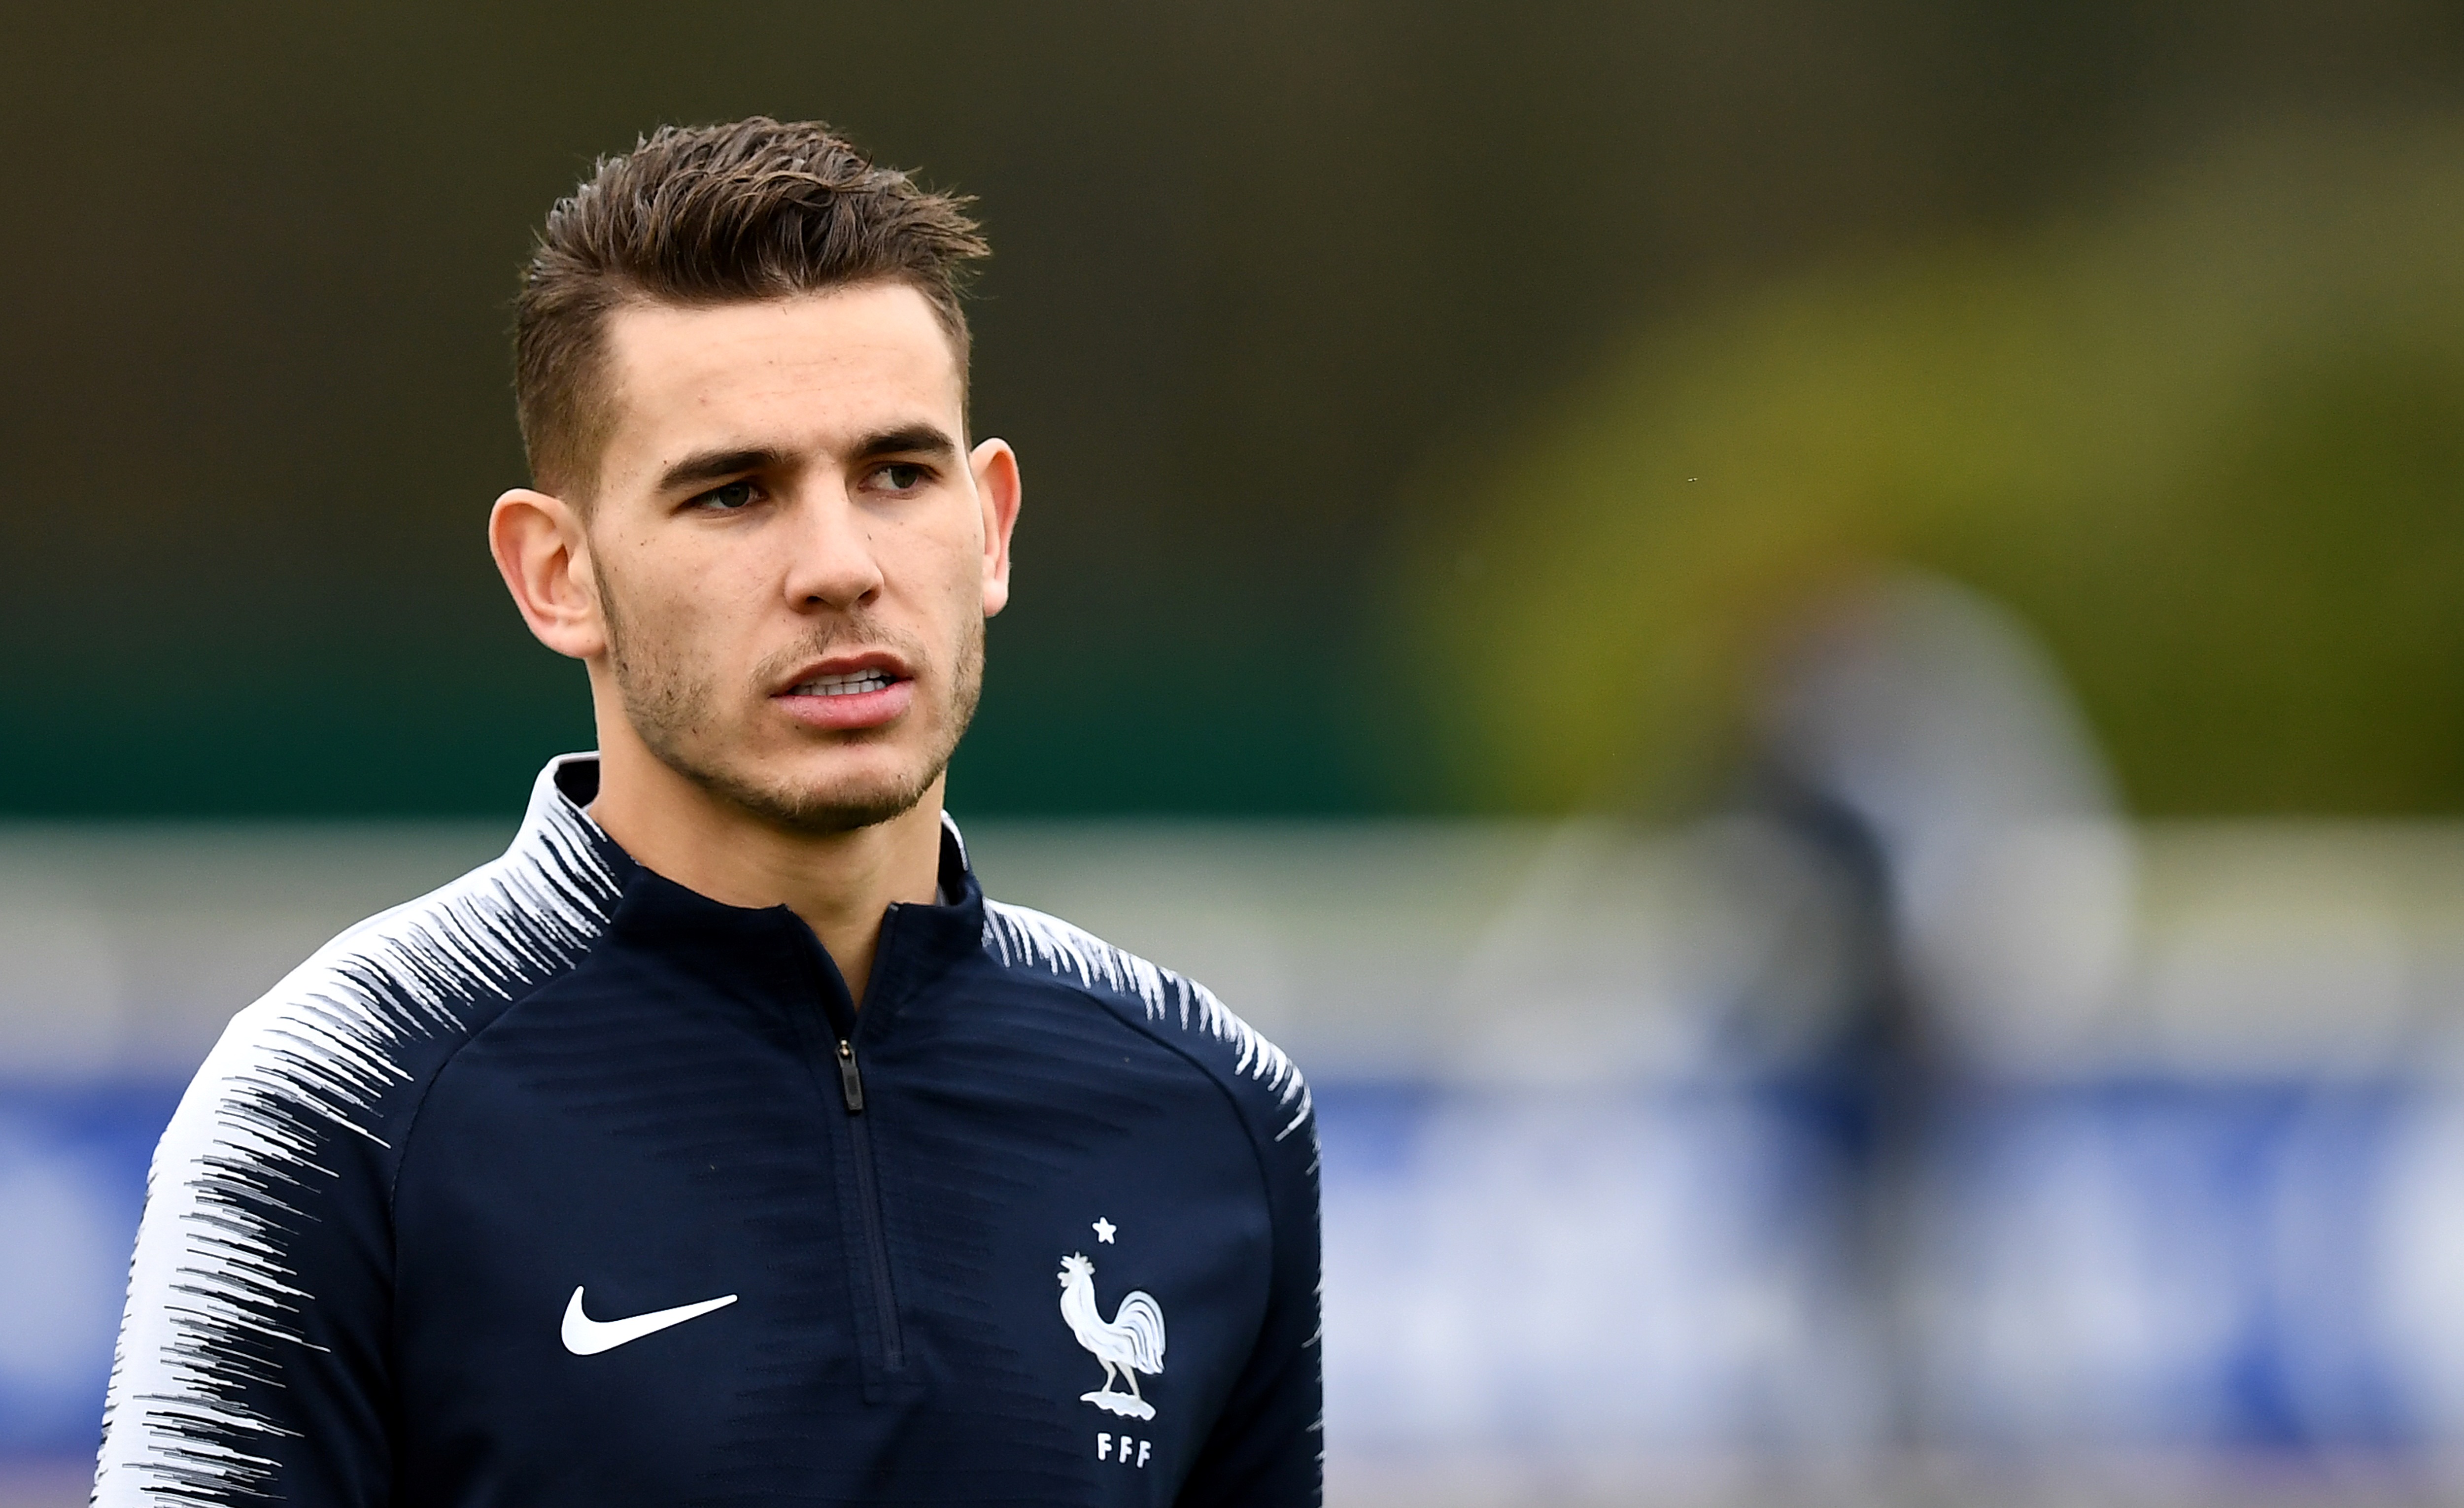 France's defender Lucas Hernandez takes part in a training session in Clairefontaine-en-Yvelines on March 25, 2018, as part of the team's preparation for the friendly football match against Russia.  / AFP PHOTO / FRANCK FIFE        (Photo credit should read FRANCK FIFE/AFP/Getty Images)